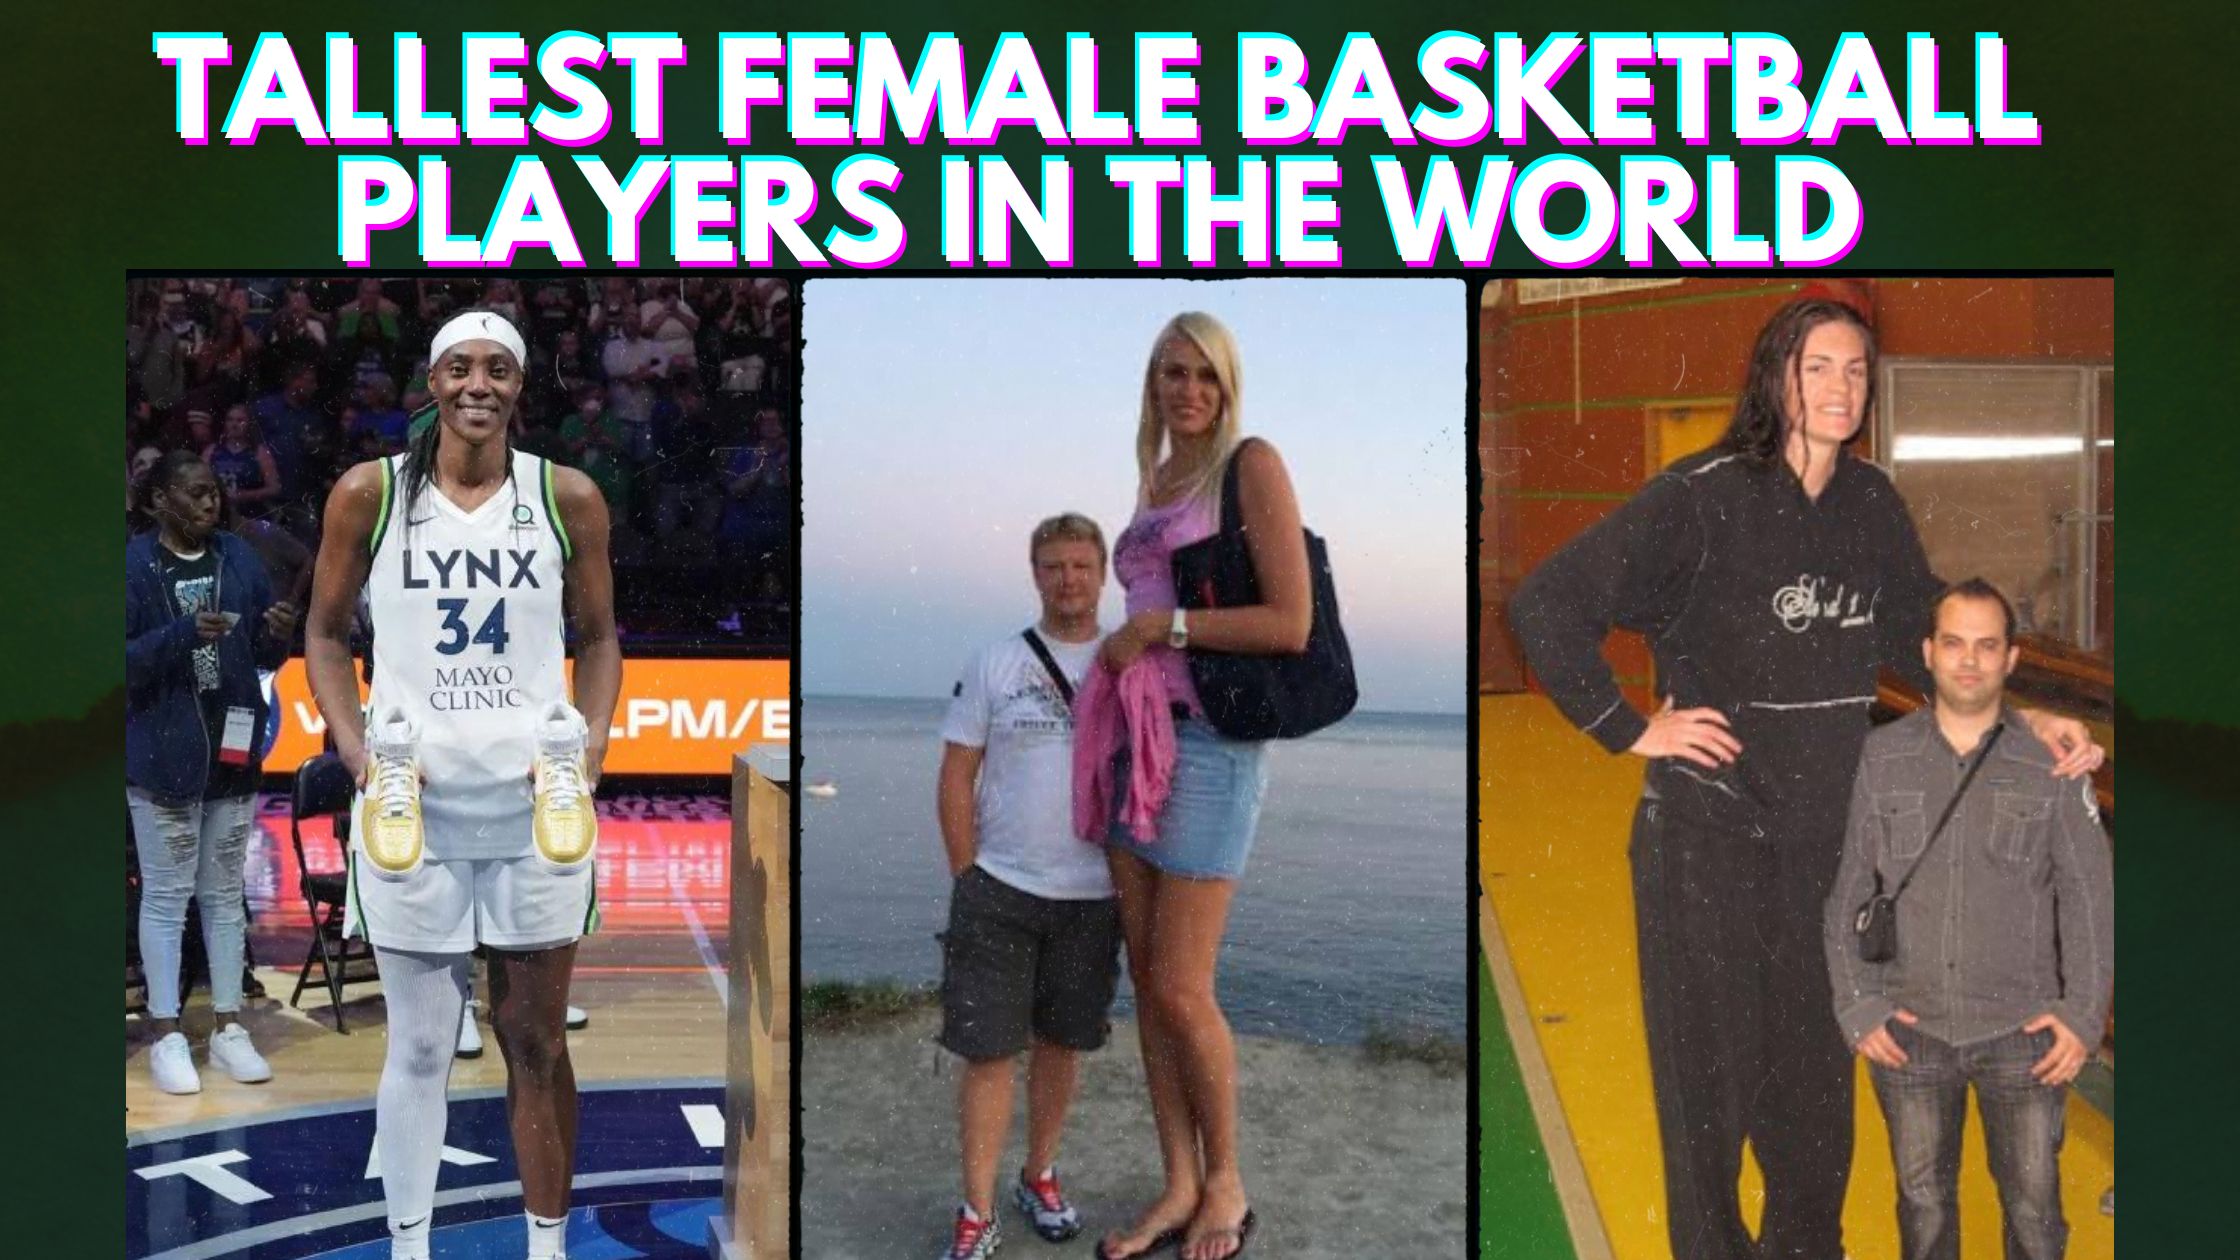 Tallest Female Basketball Players in the World (WNBA)